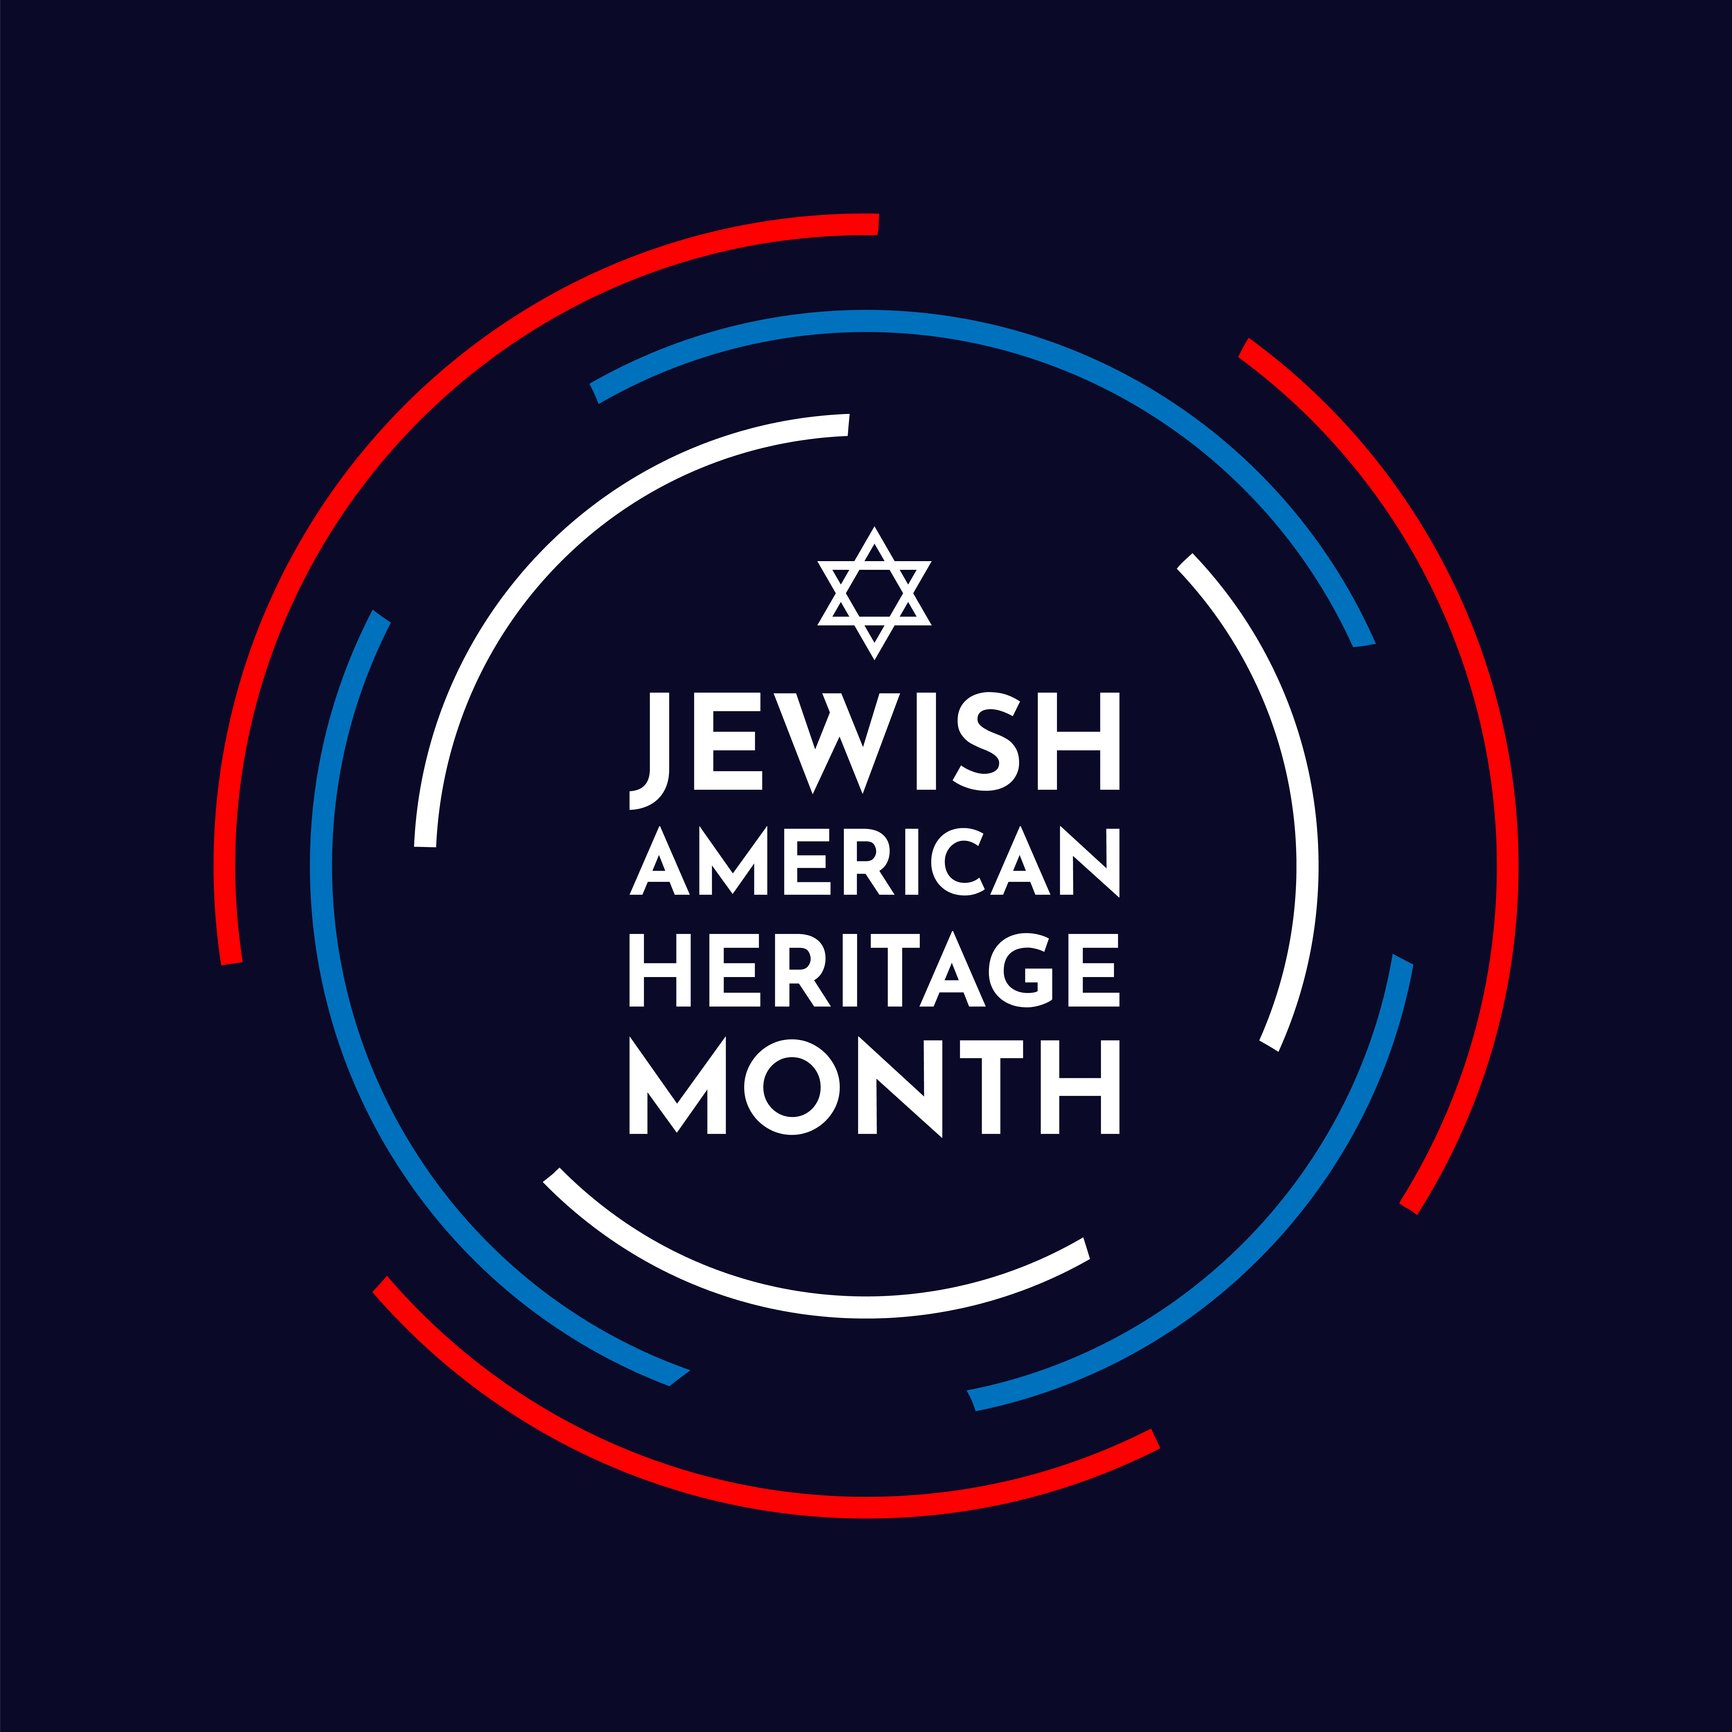 ✡️ It's Jewish American Heritage Month and it's more important now, than ever, that we SHOUT our Jewish pride in support of all and fellow Jews here in American + abroad ✡️
&bull;
🇮🇱 My heart is always with the people of Israel 🇮🇱 #amyisraelchai 